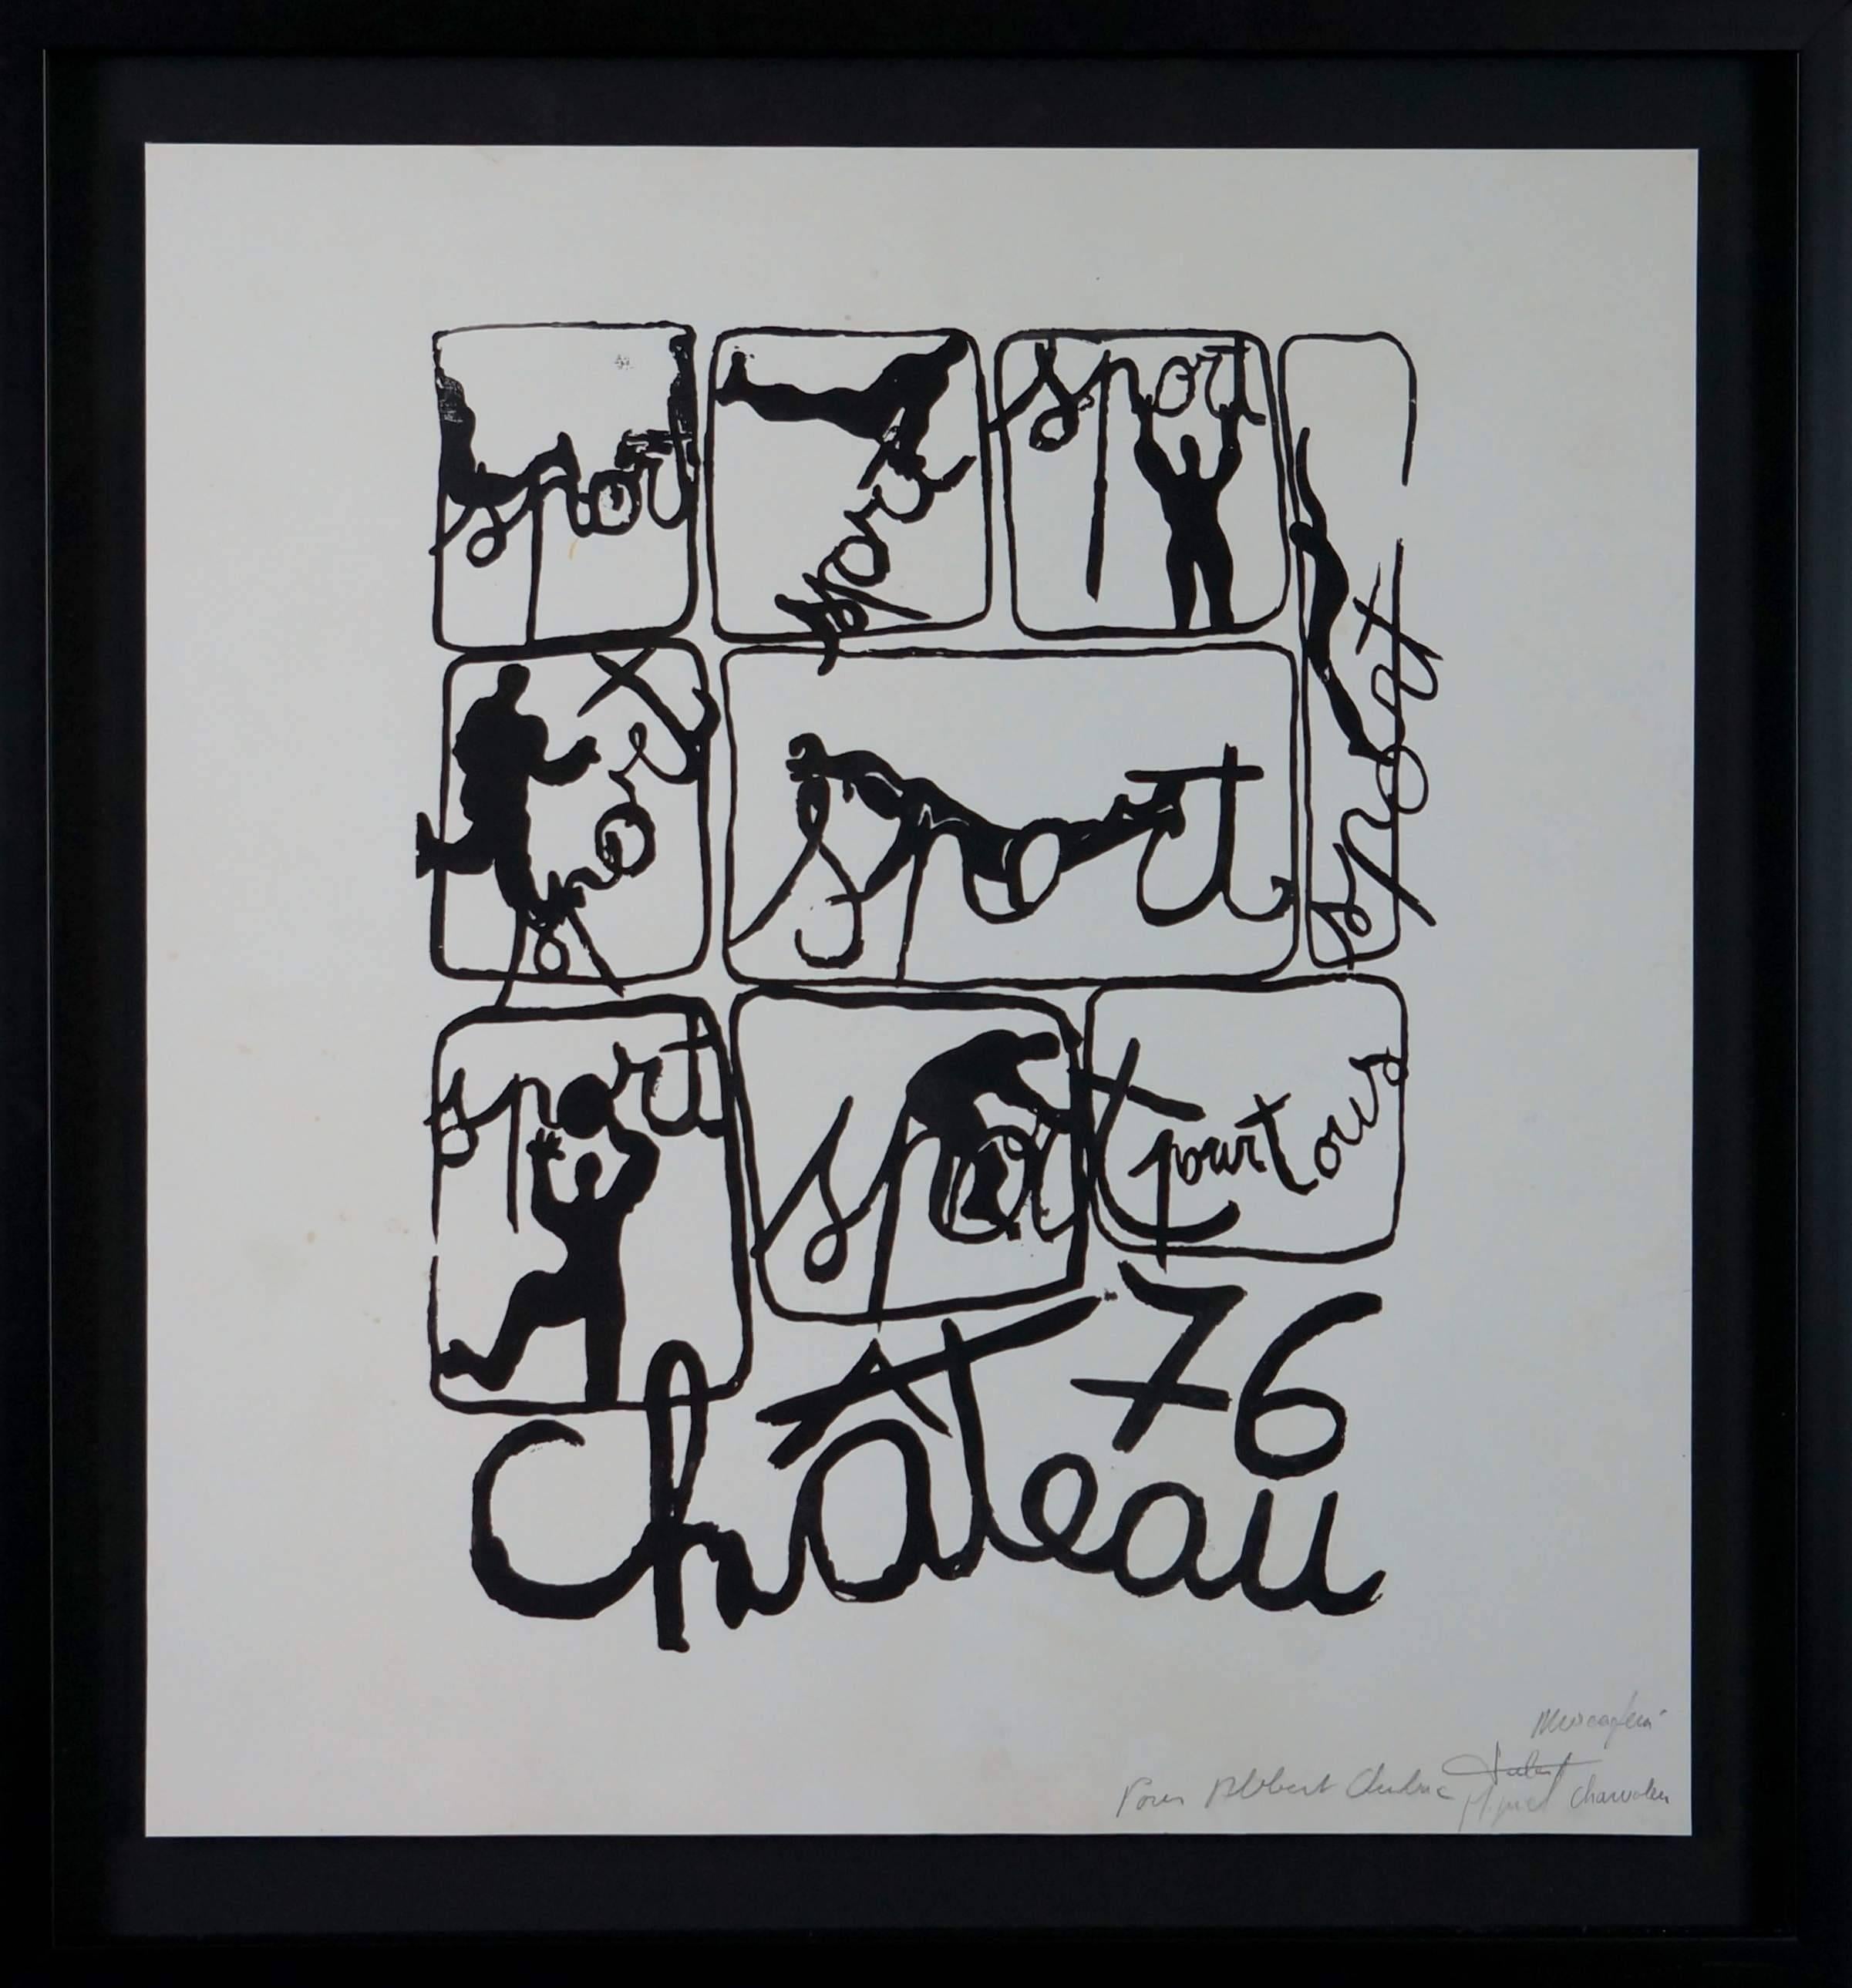 Hommage A Chubac, 1976 - ink on paper, 64x59 cm., framed